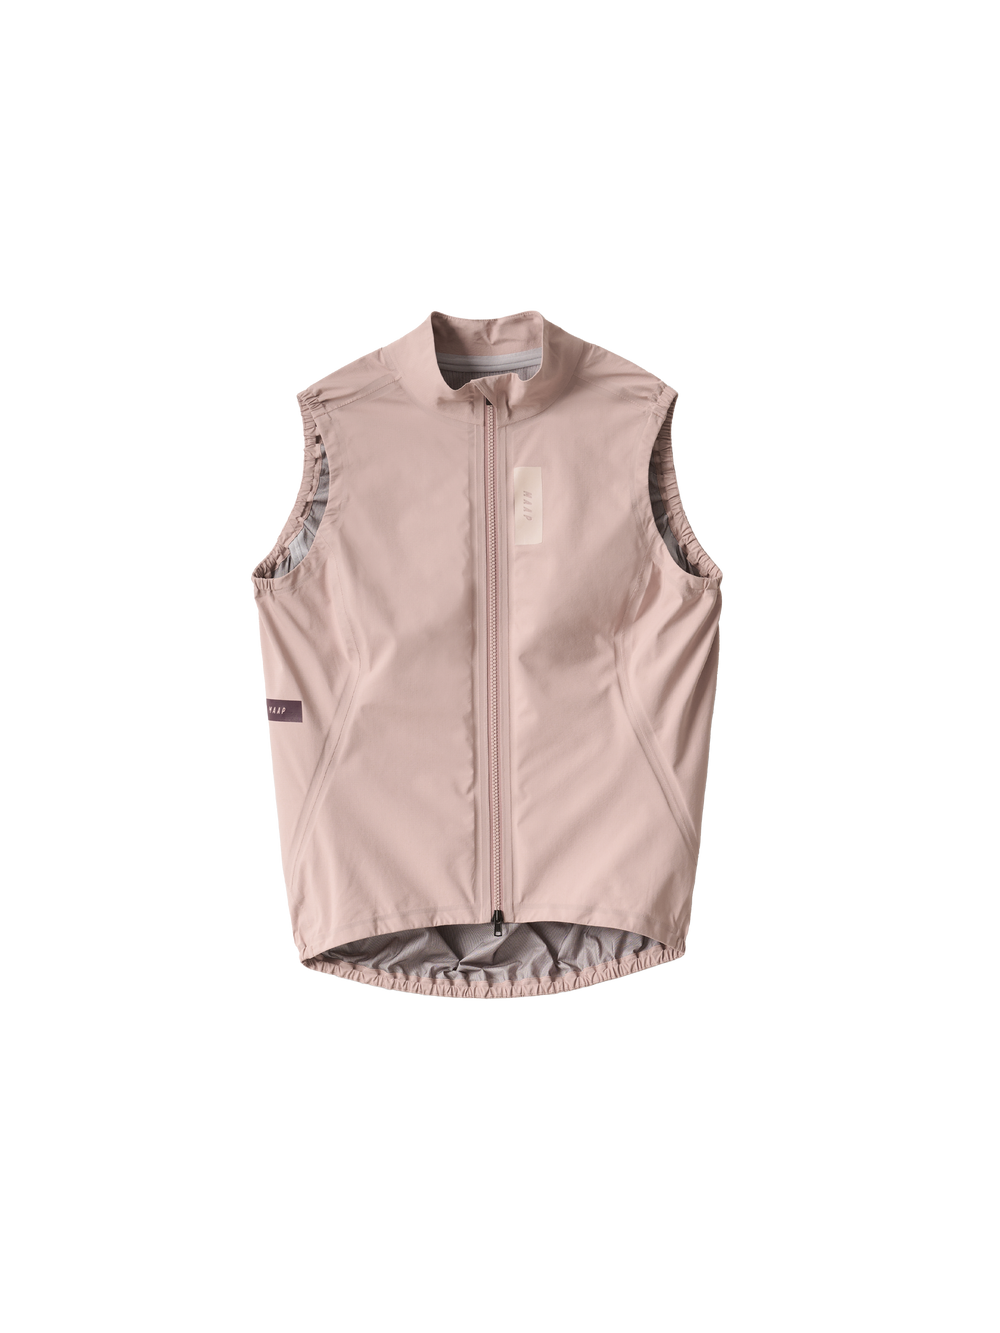 Product Image for Women's Atmos Vest